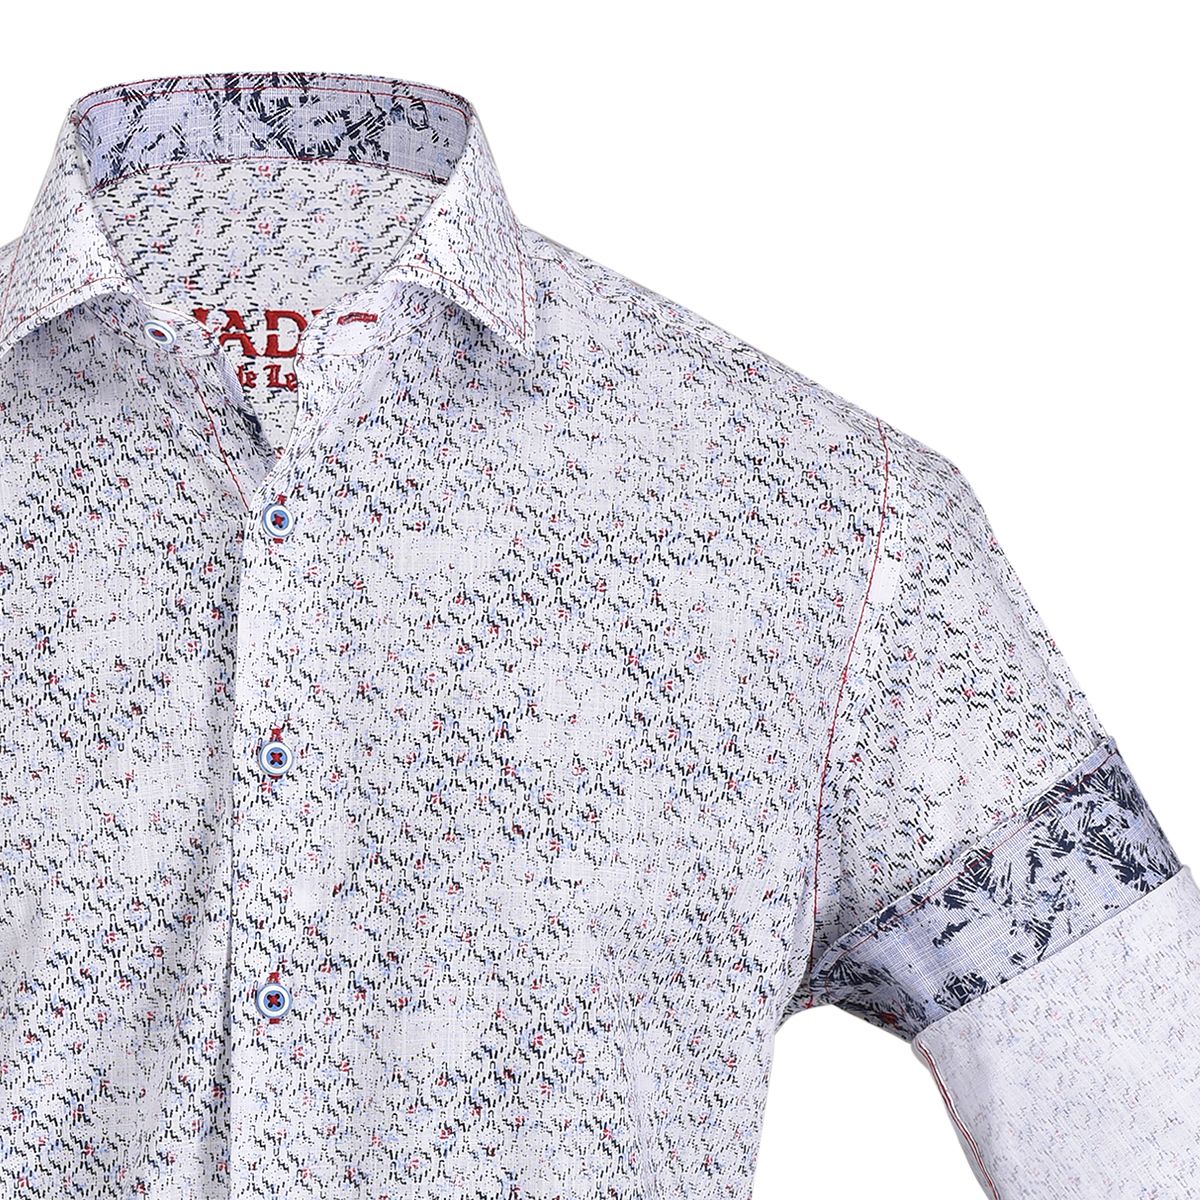 CM0W476 - Cuadra white fashion casual fractured abstract shirt for men-Kuet.us